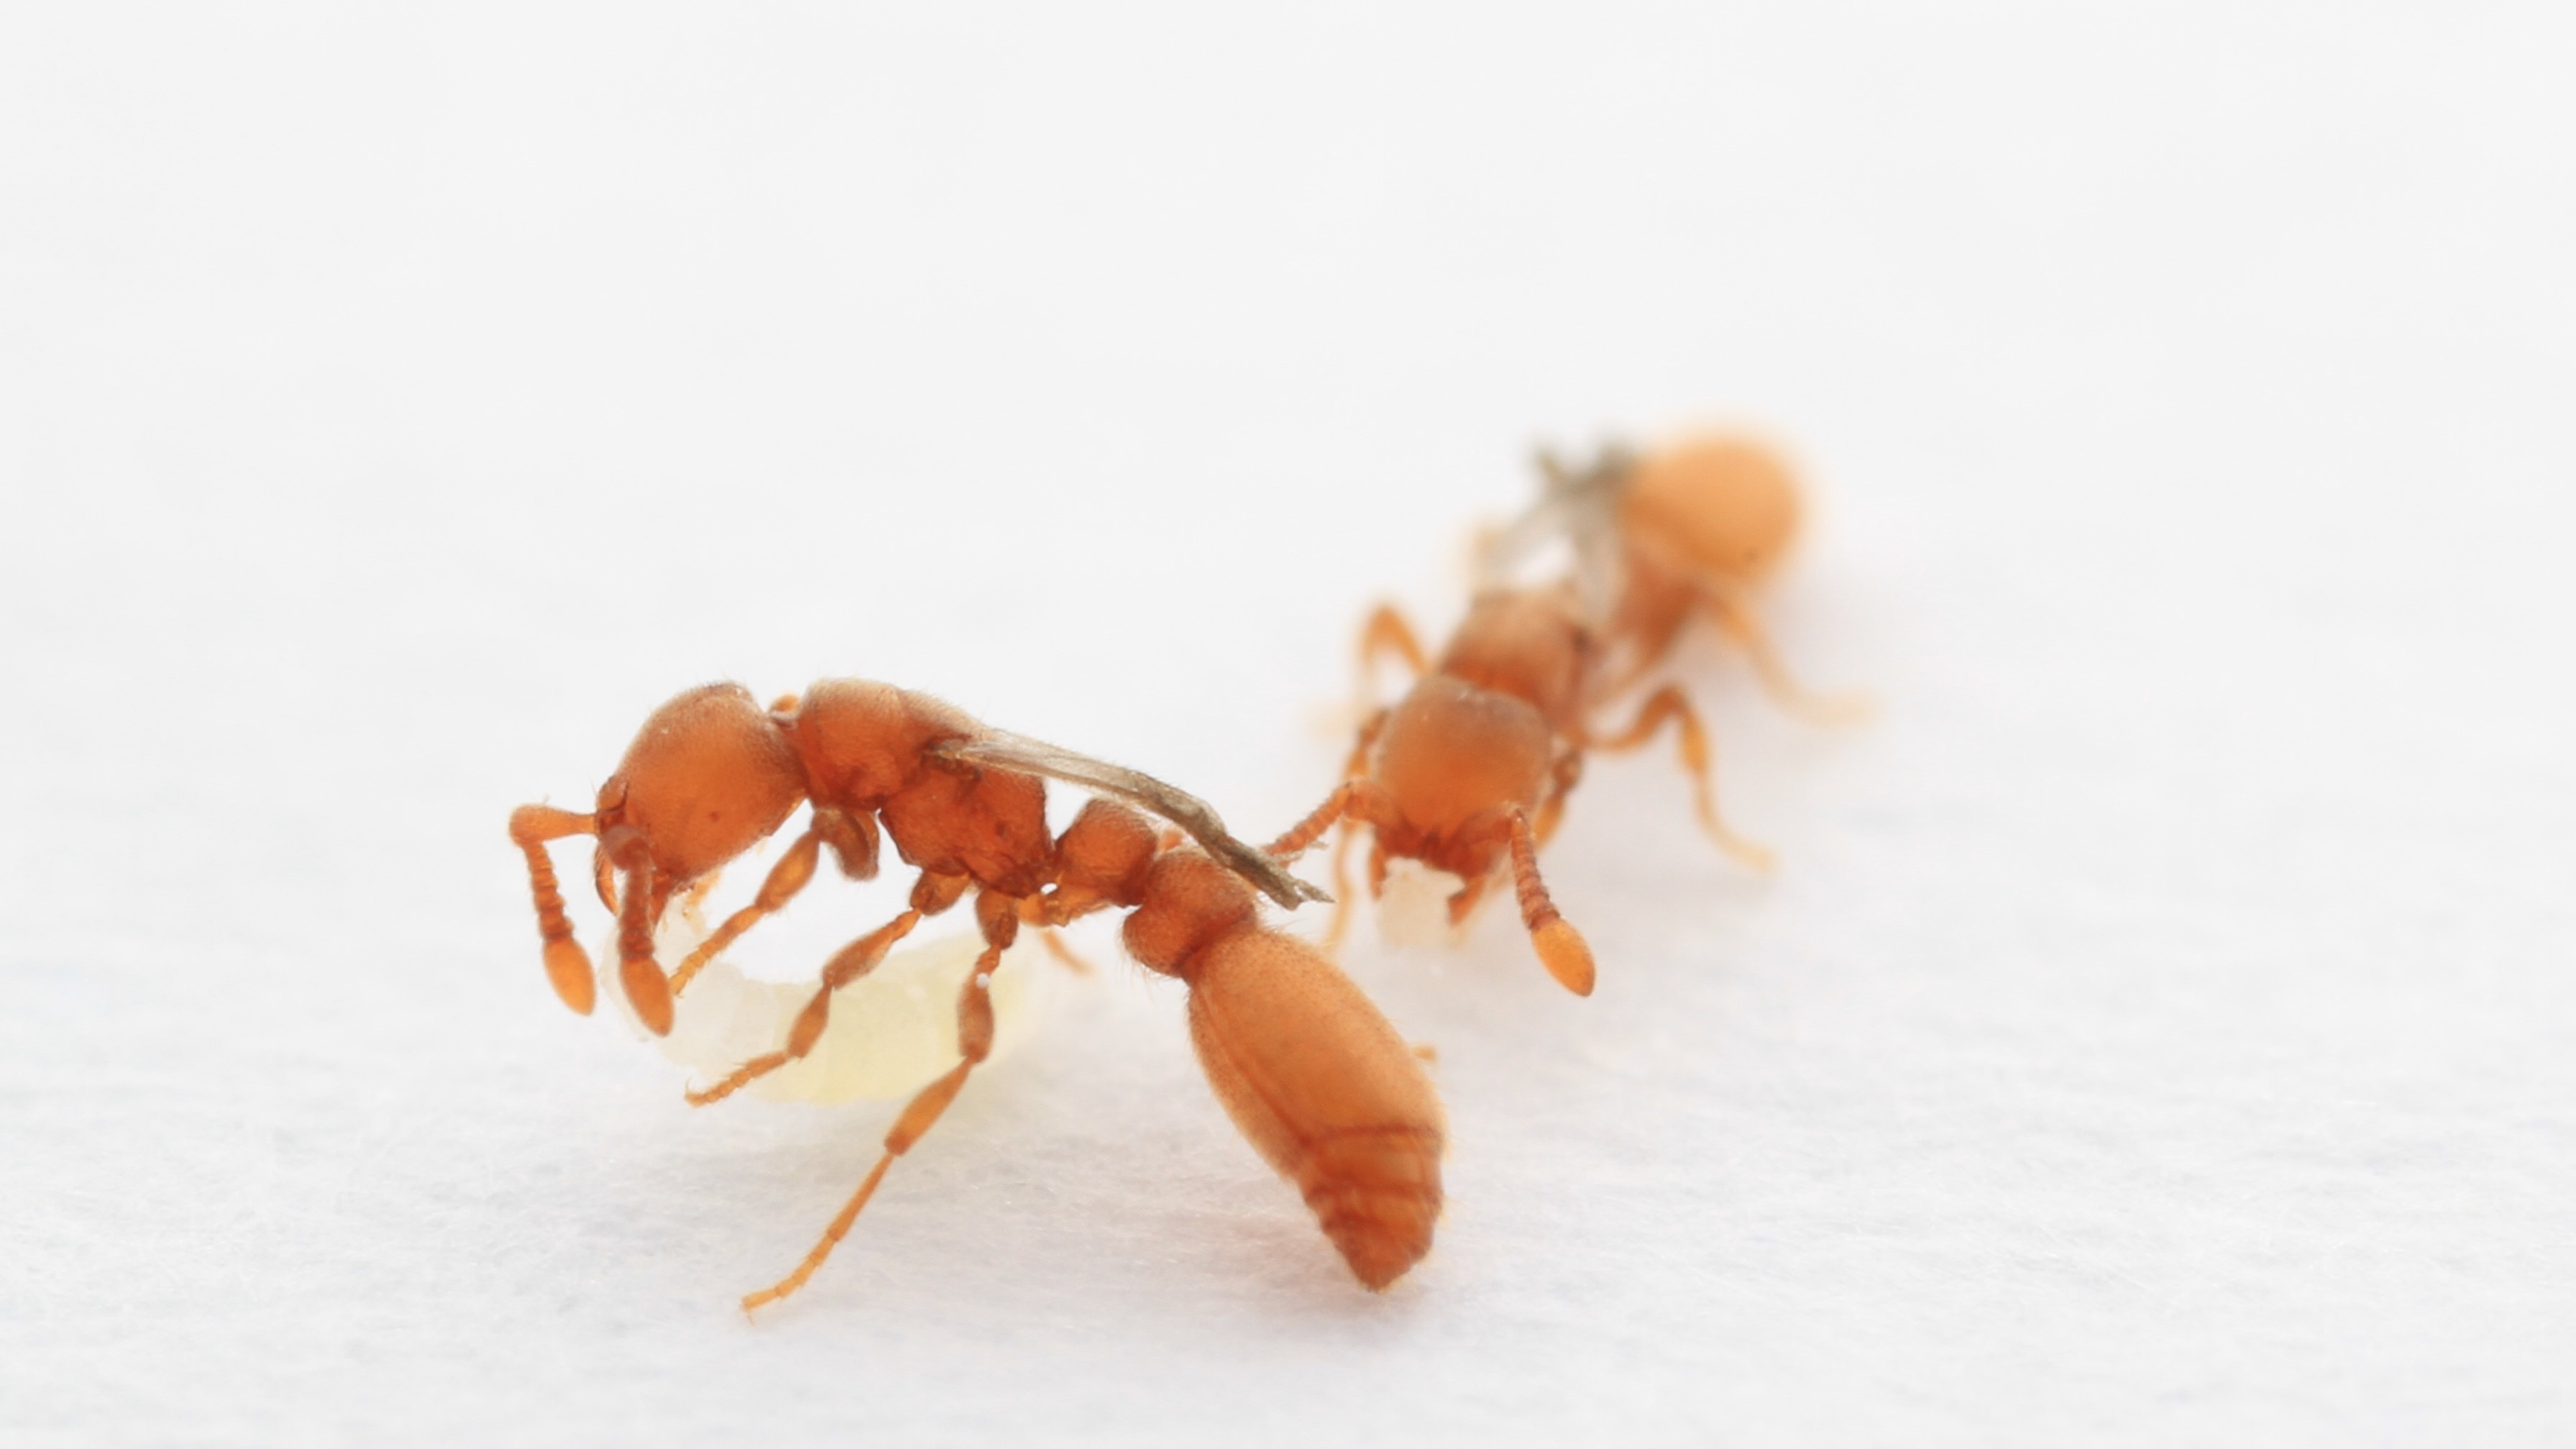 Two winged clonal raider ants stand out against a white background.